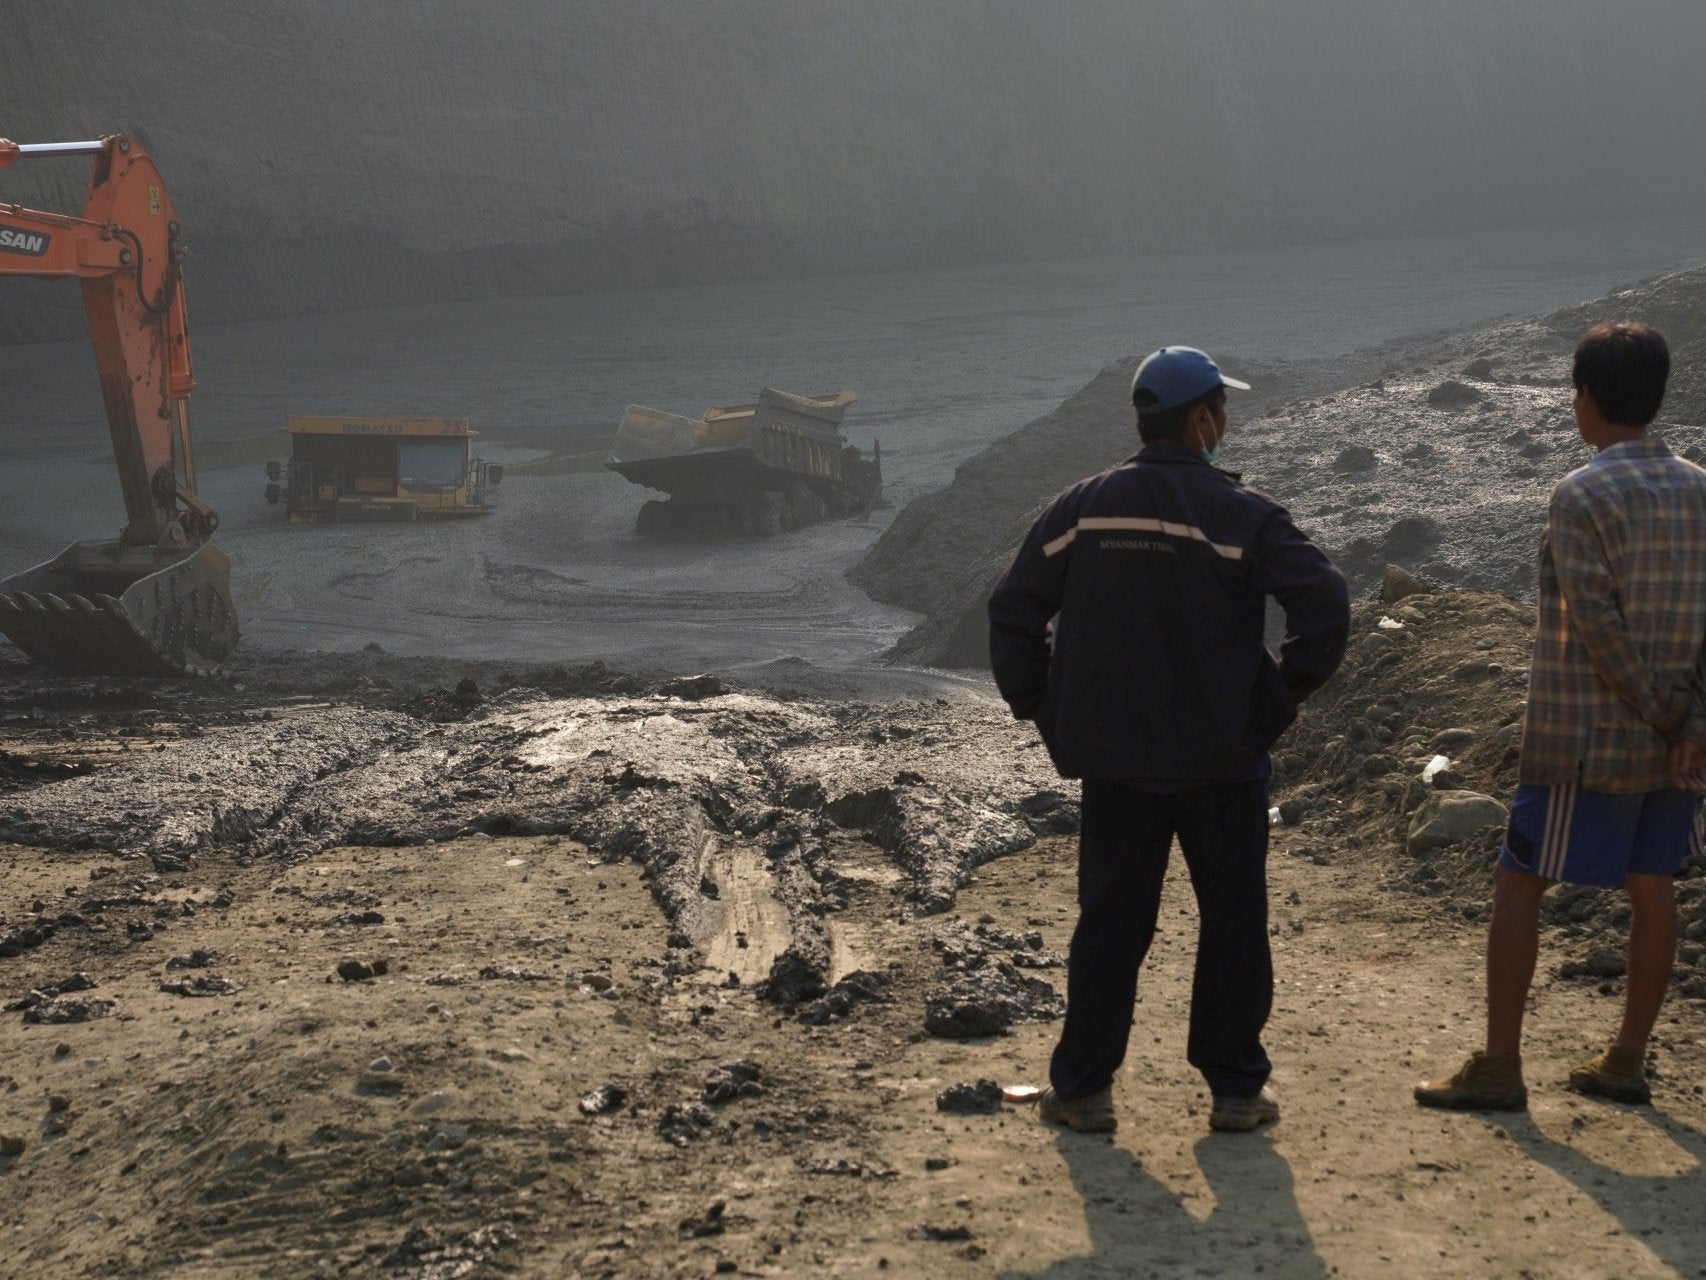 More than 50 people are believed to have died in a mudslide at a jade mining site in Hpakant, Kachin state, Myanmar, 22 April 2019.